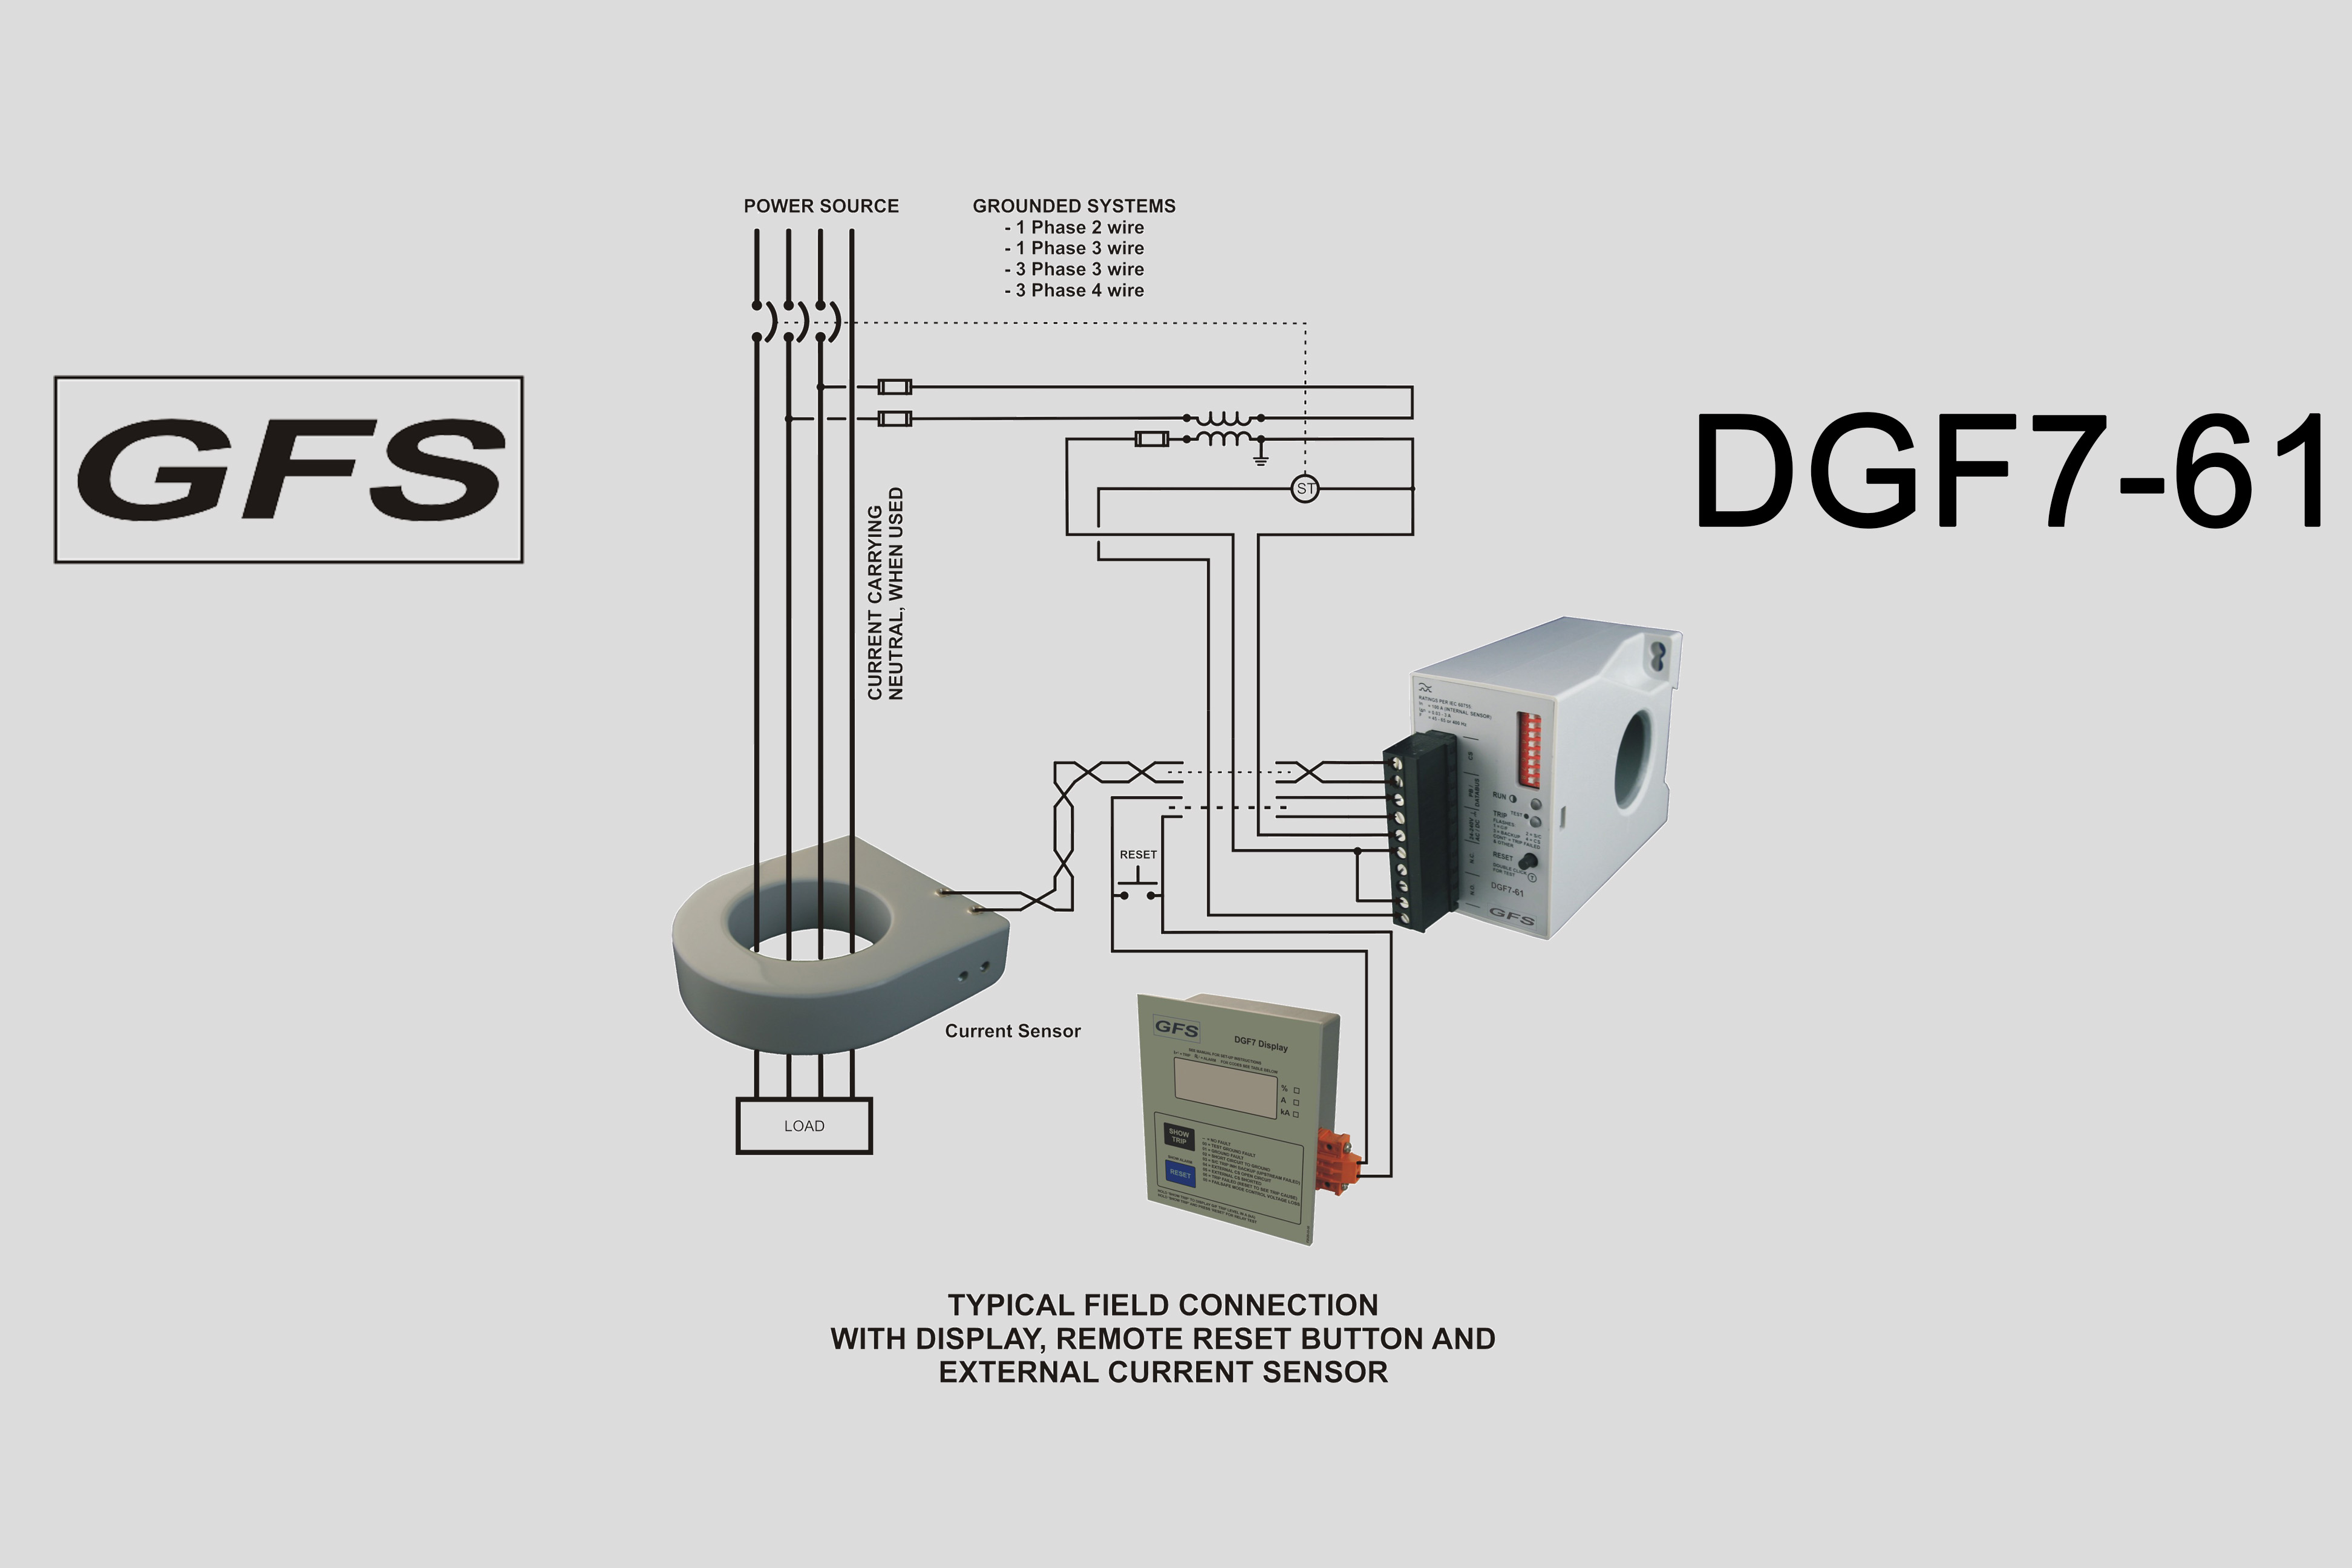 Ground Fault Relay DGF7-61 typical field connection using external sensor